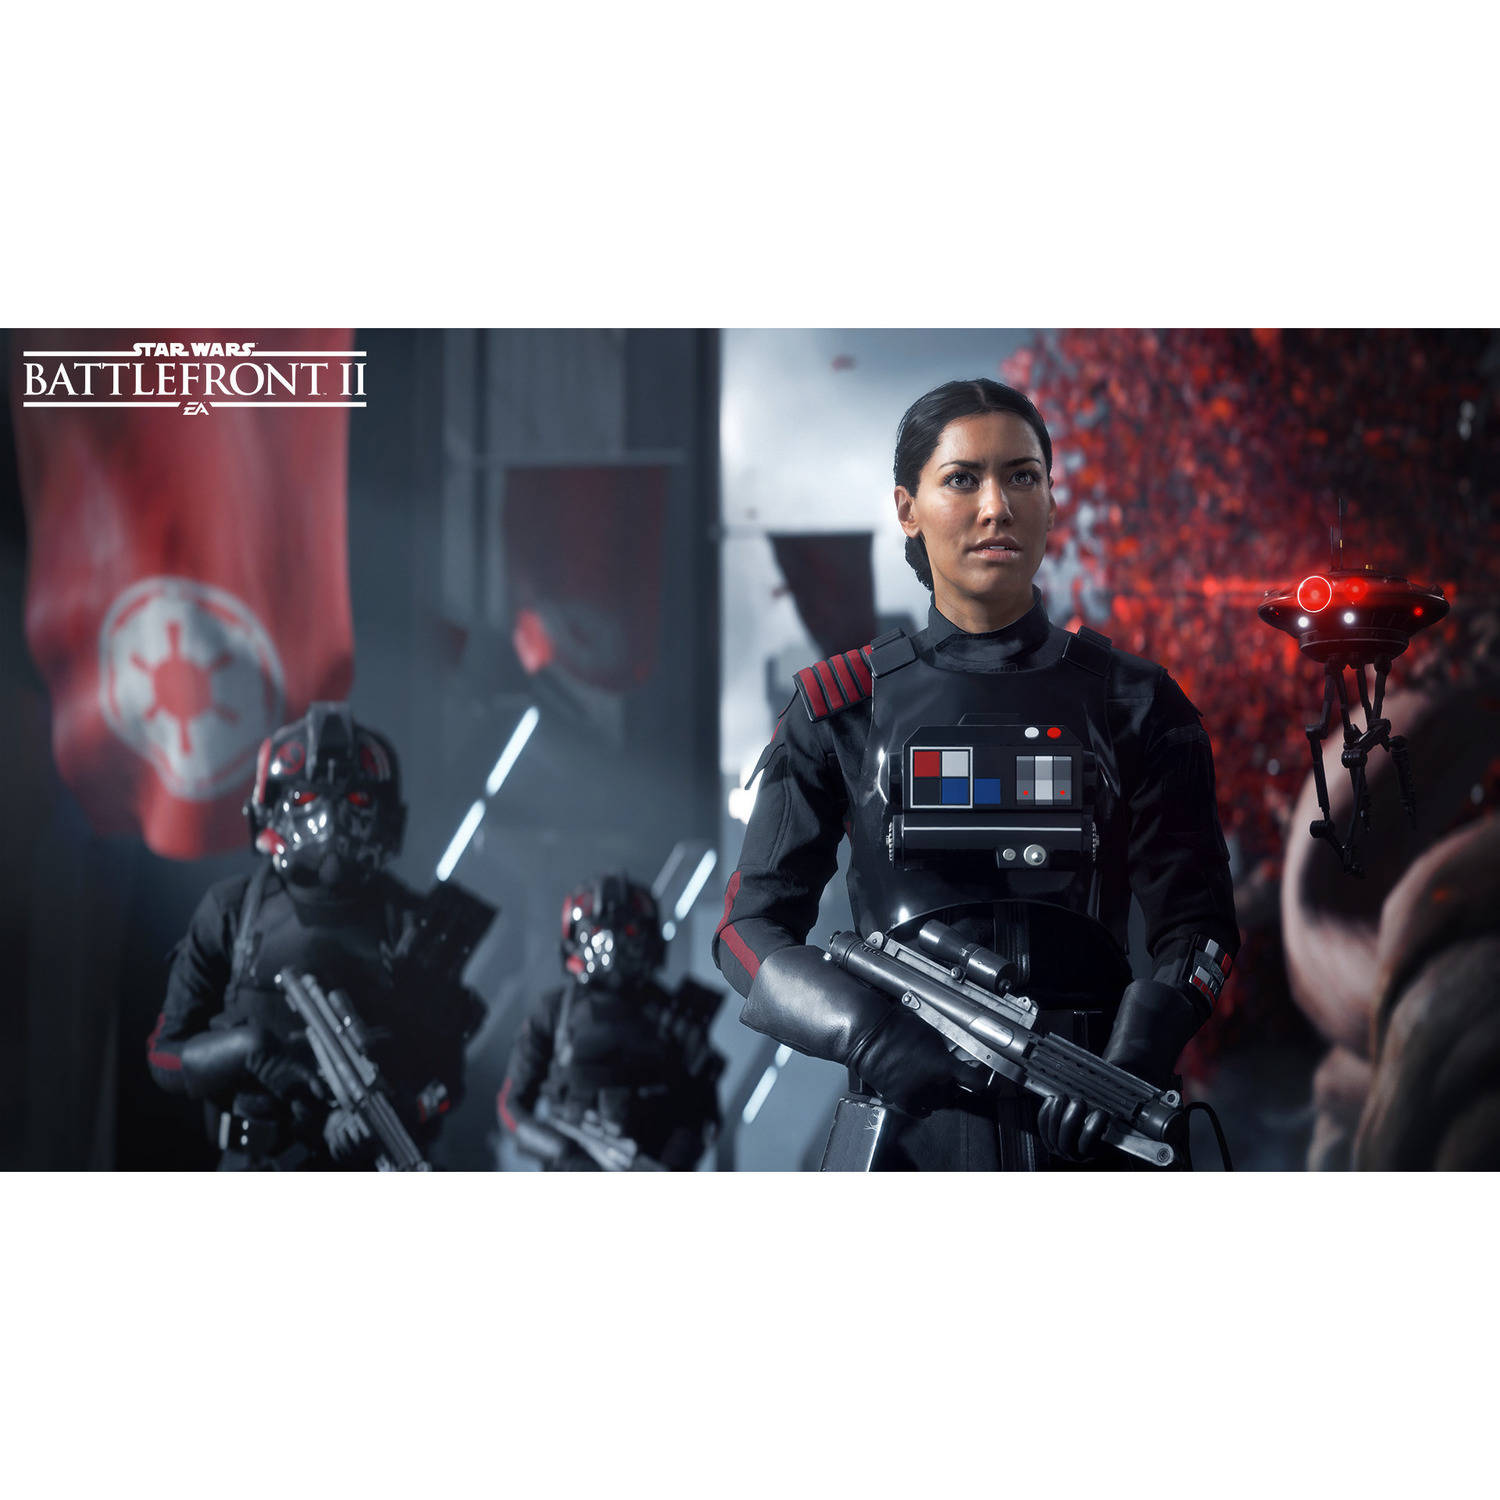 Star Wars Battlefront 2, Electronic Arts, Xbox One, [Physical], 014633735321 - image 4 of 4